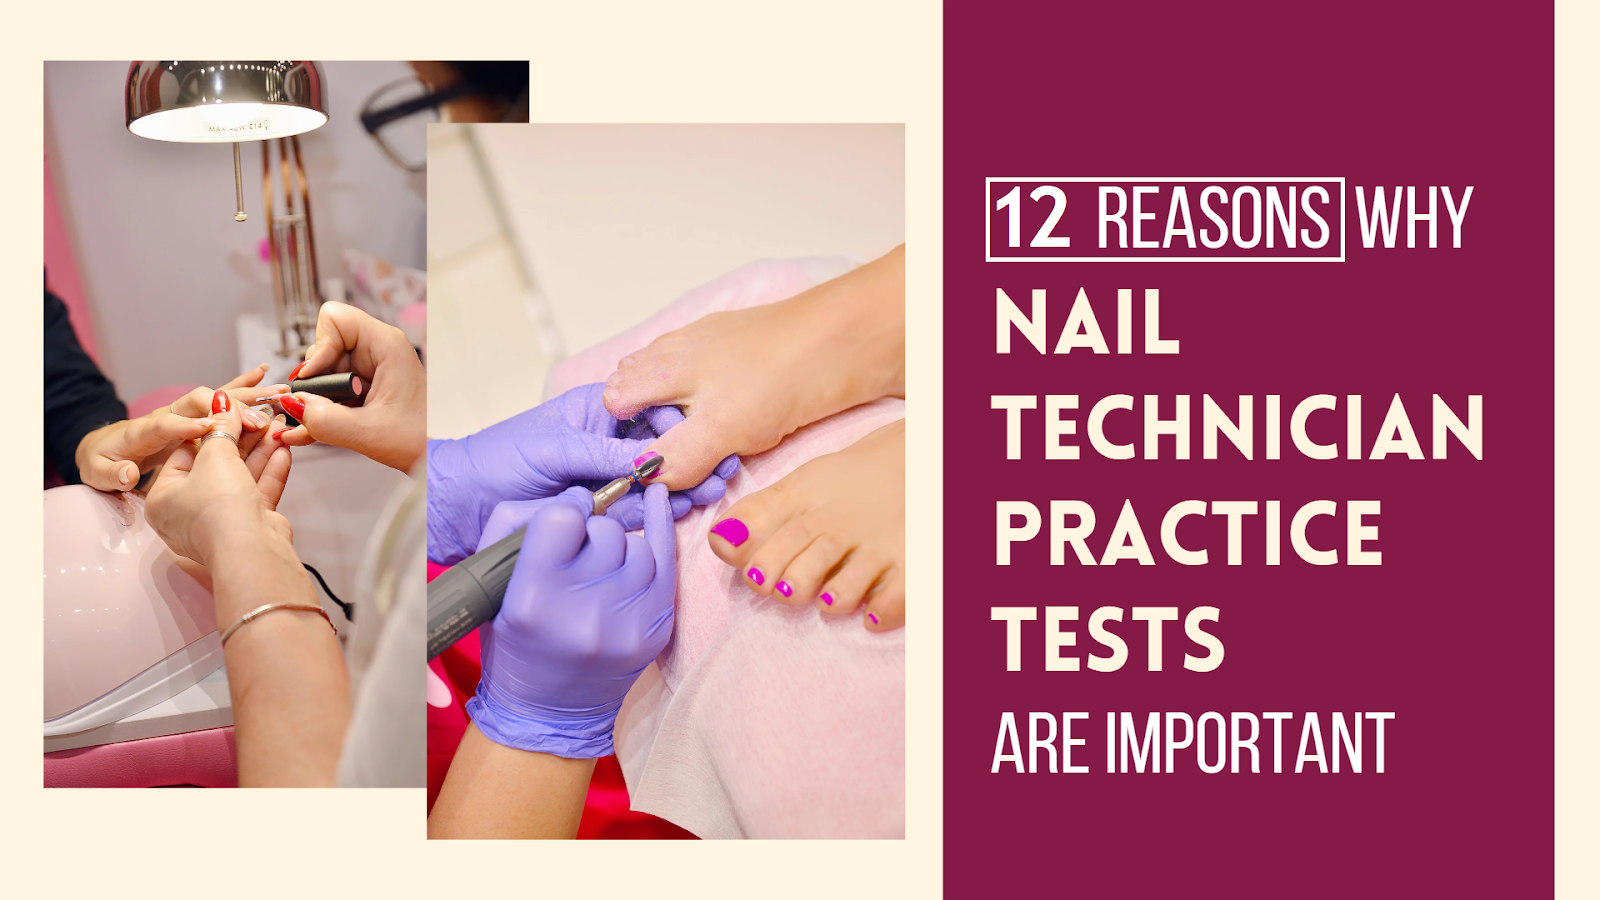 12 Reasons Why Nail Technician Practice Tests Are Important